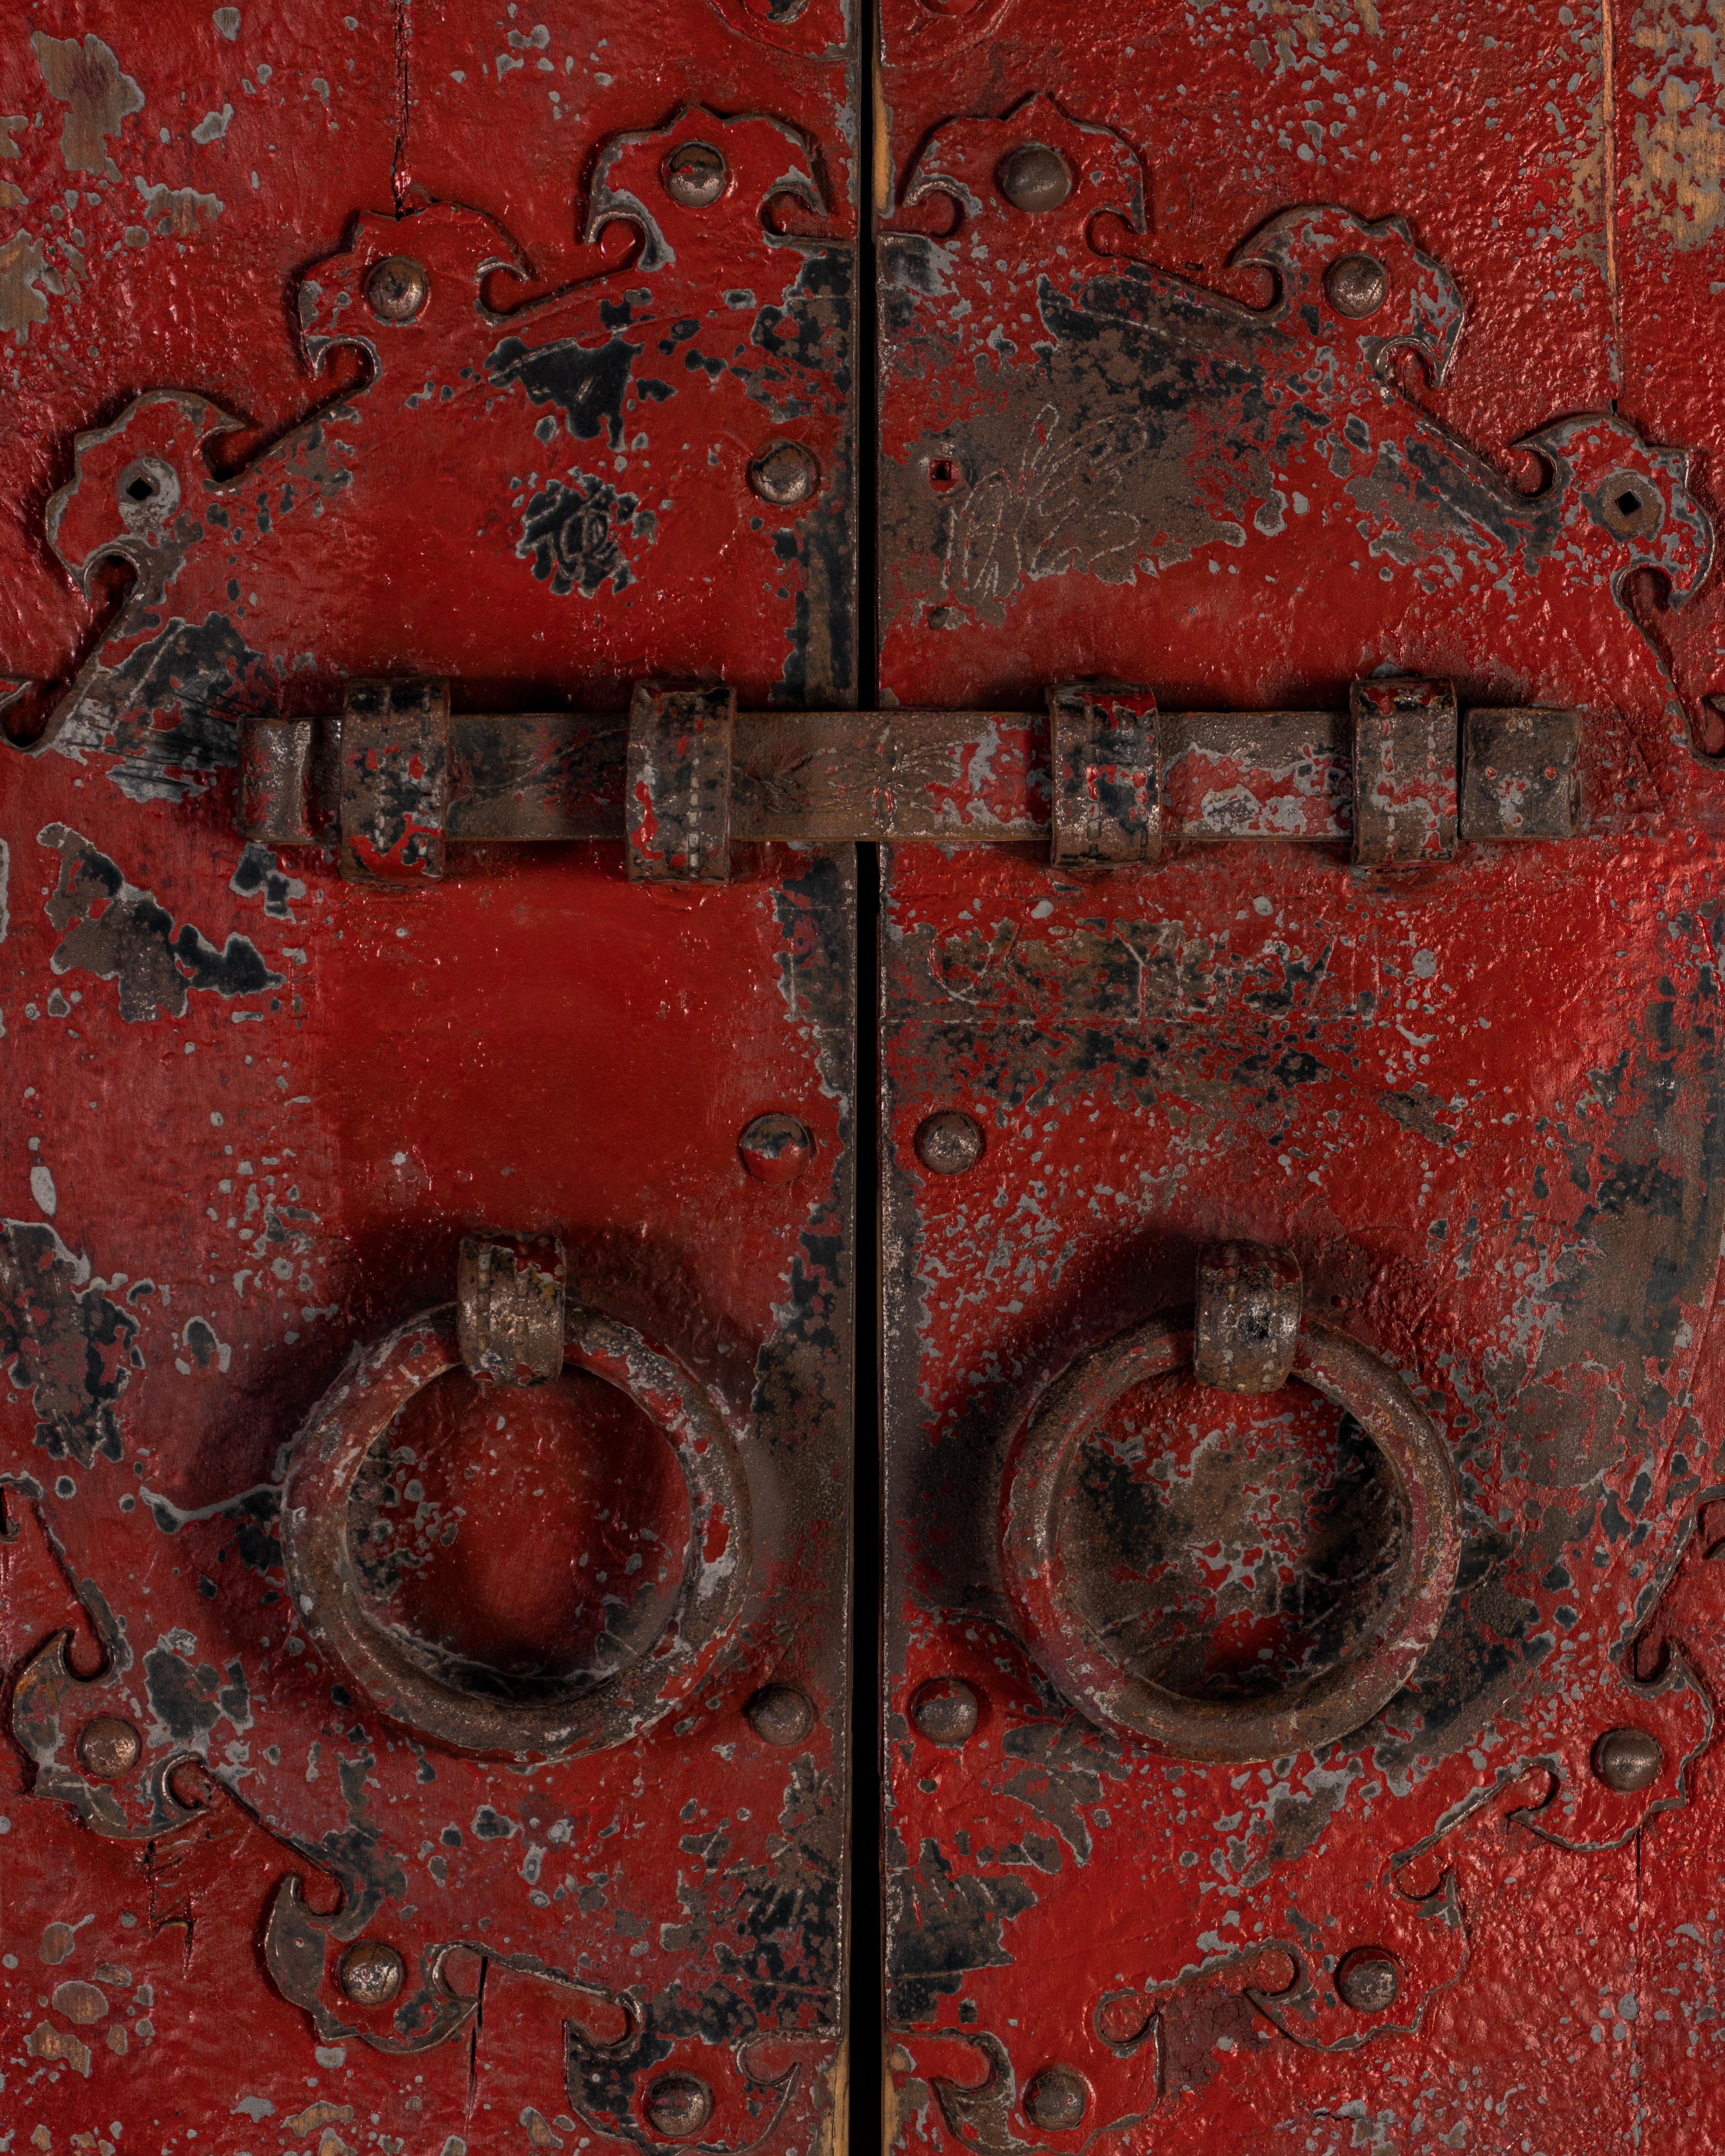 Contemporary Pair of Red Patina South Asian Doors Repurposed as Wall Decor